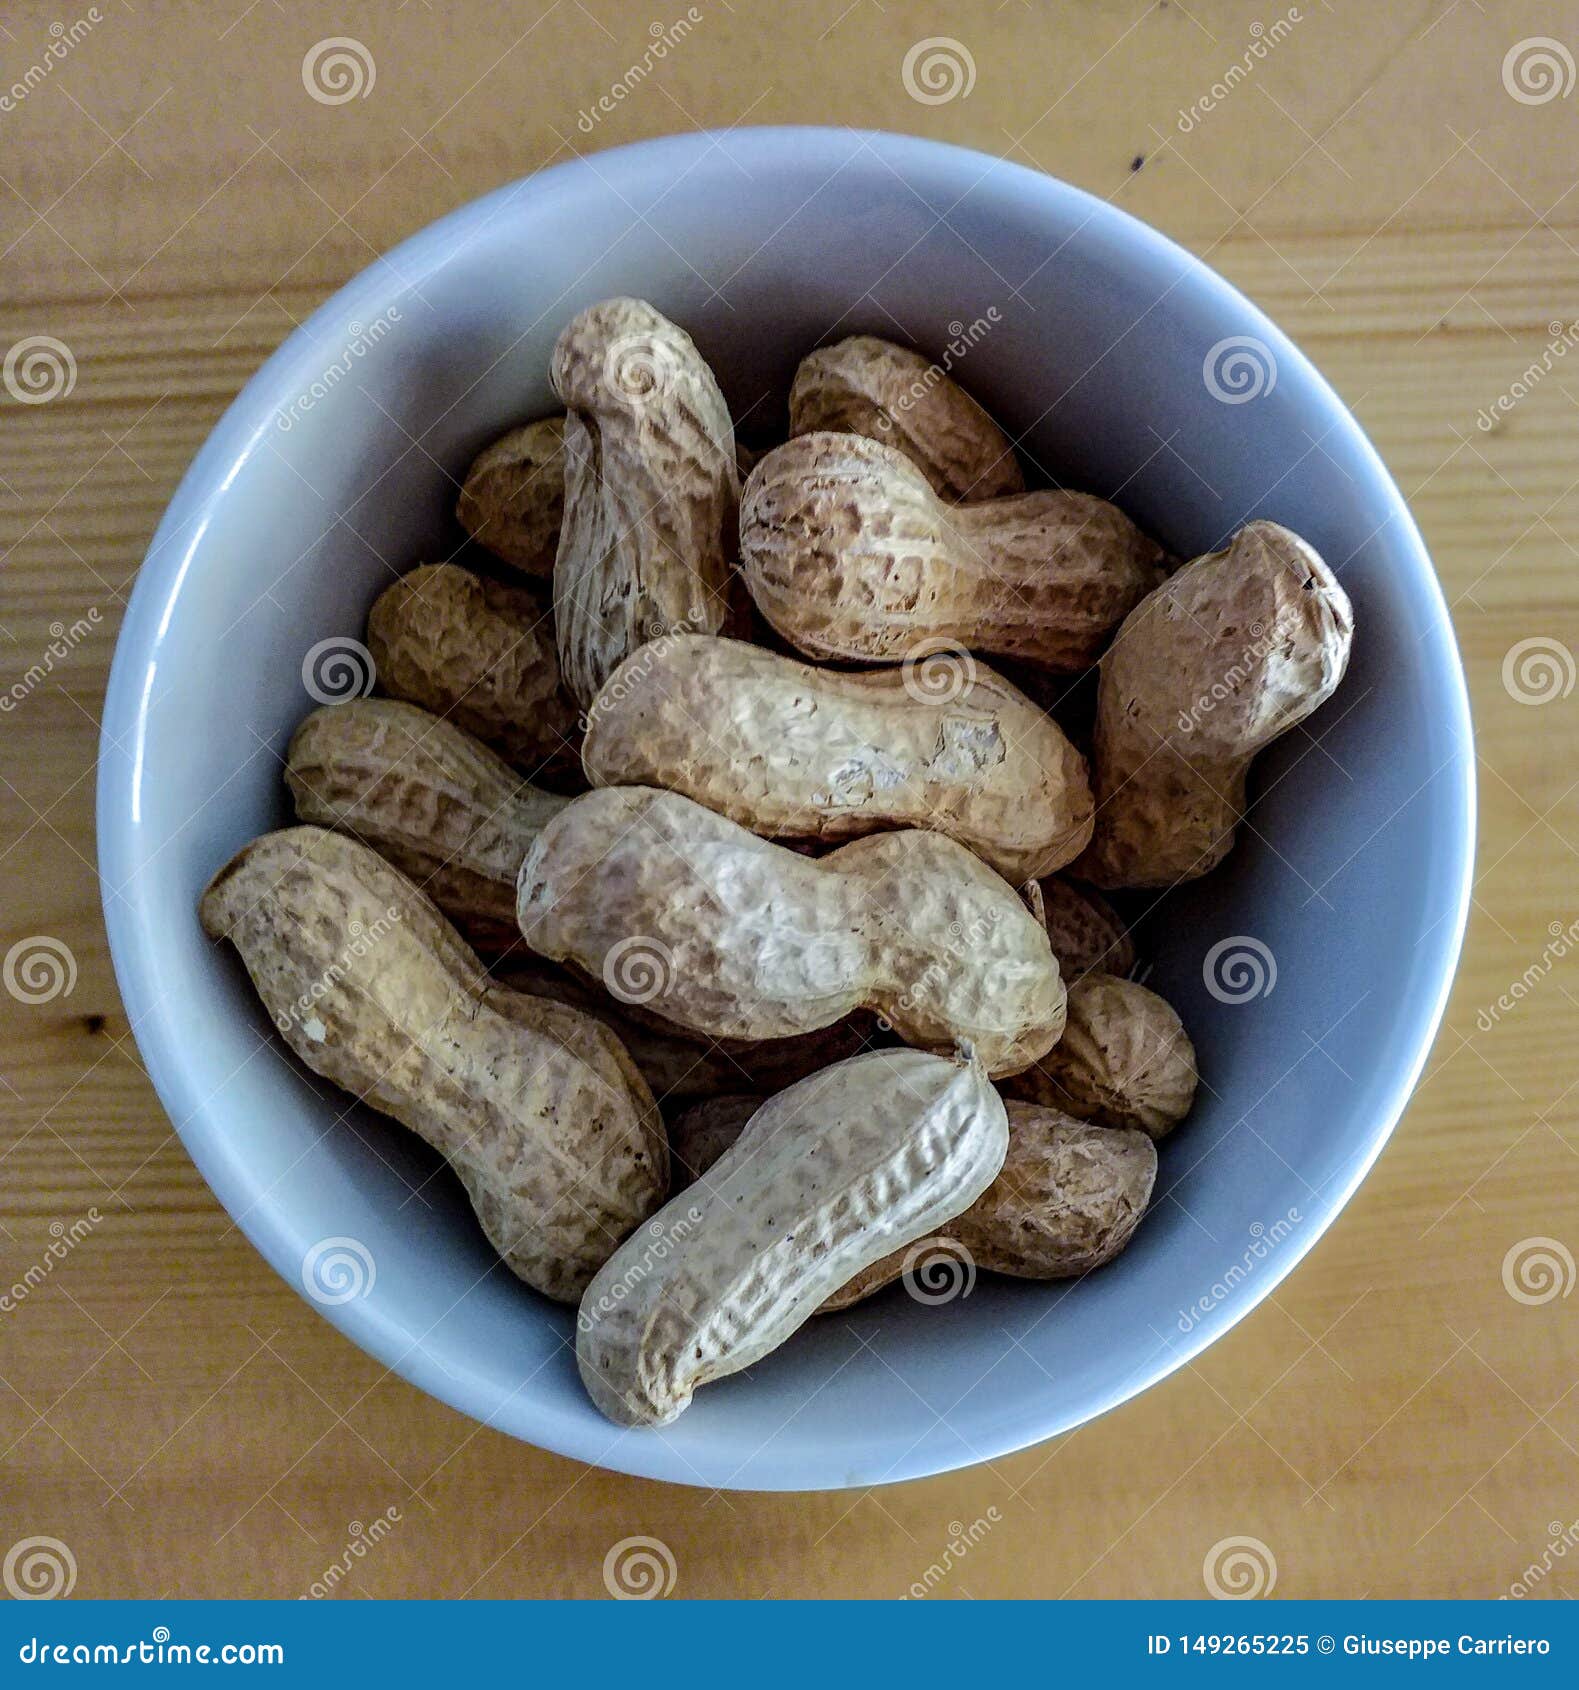 peanuts or peanuts, a common food and widely used in bars to accompany aperitifs